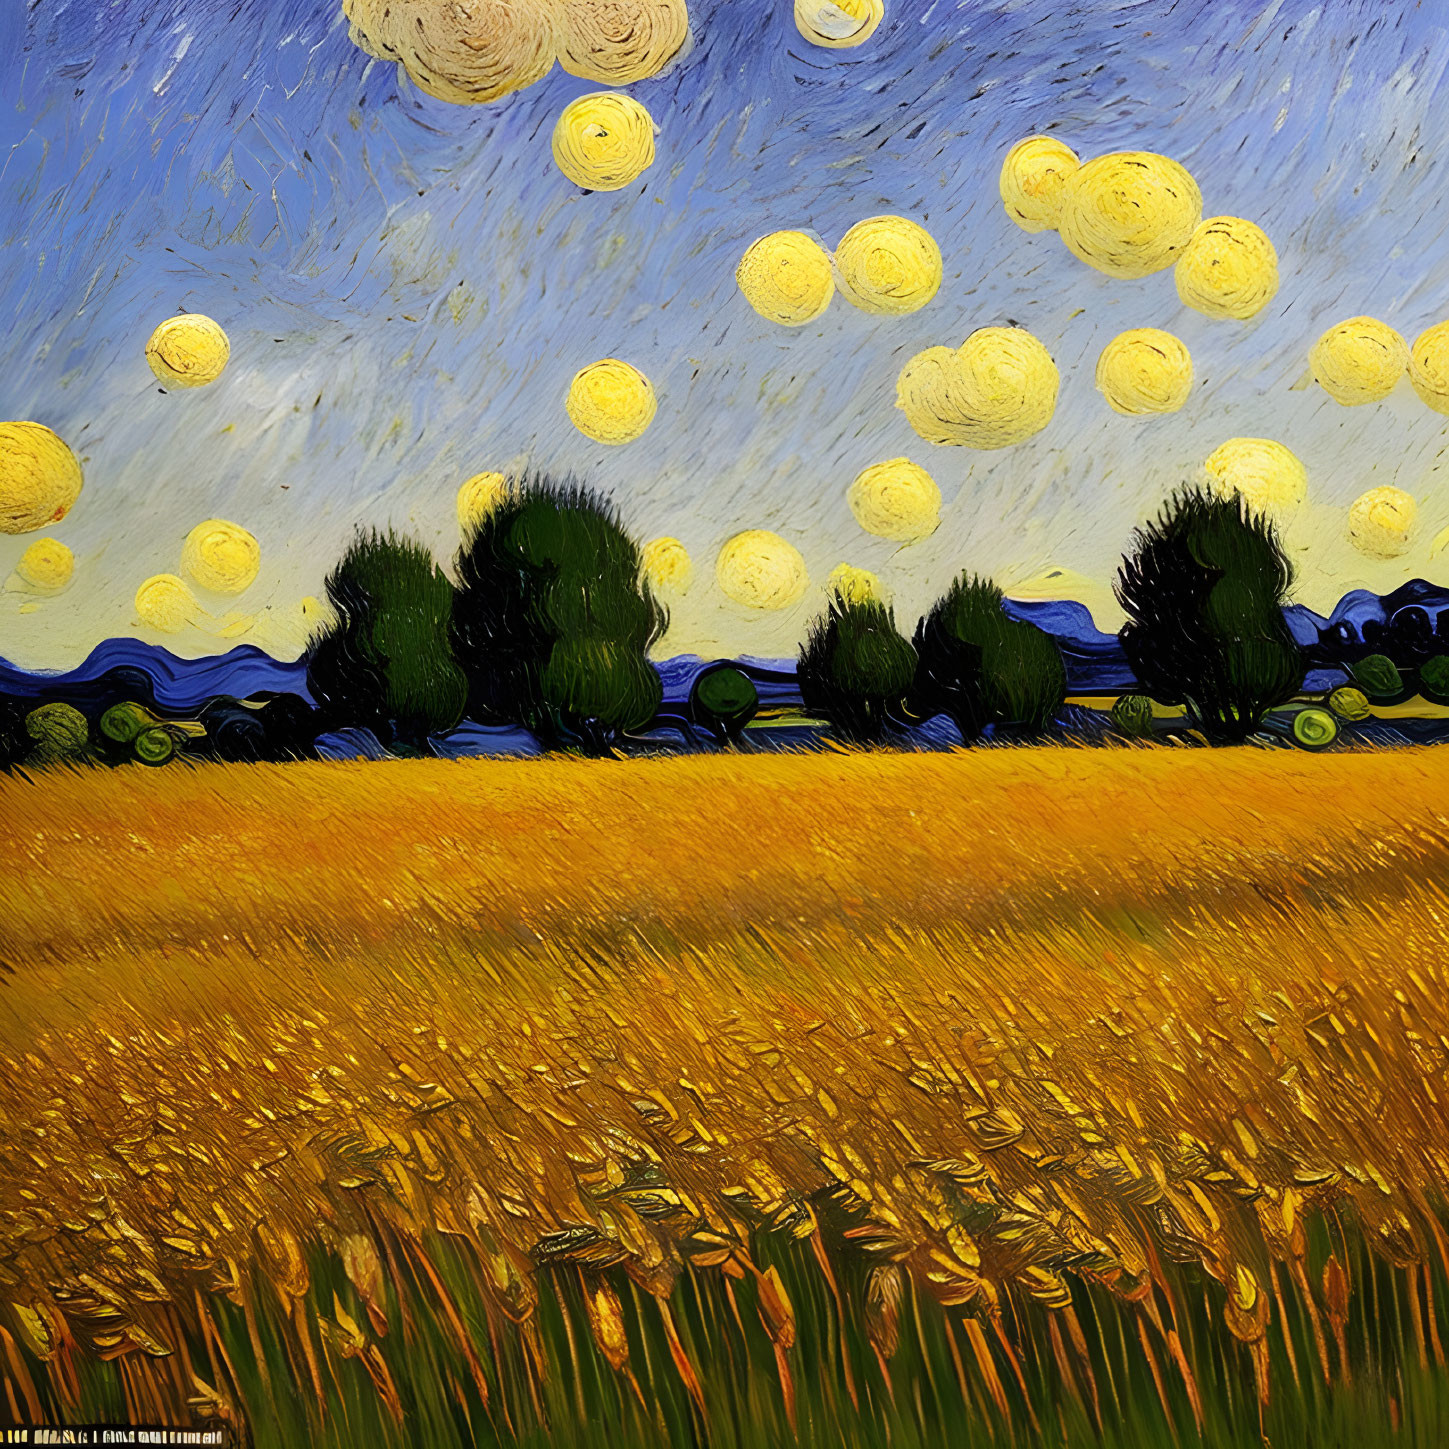 Colorful Starry Sky Painting with Yellow Orbs, Wheat Field, and Trees